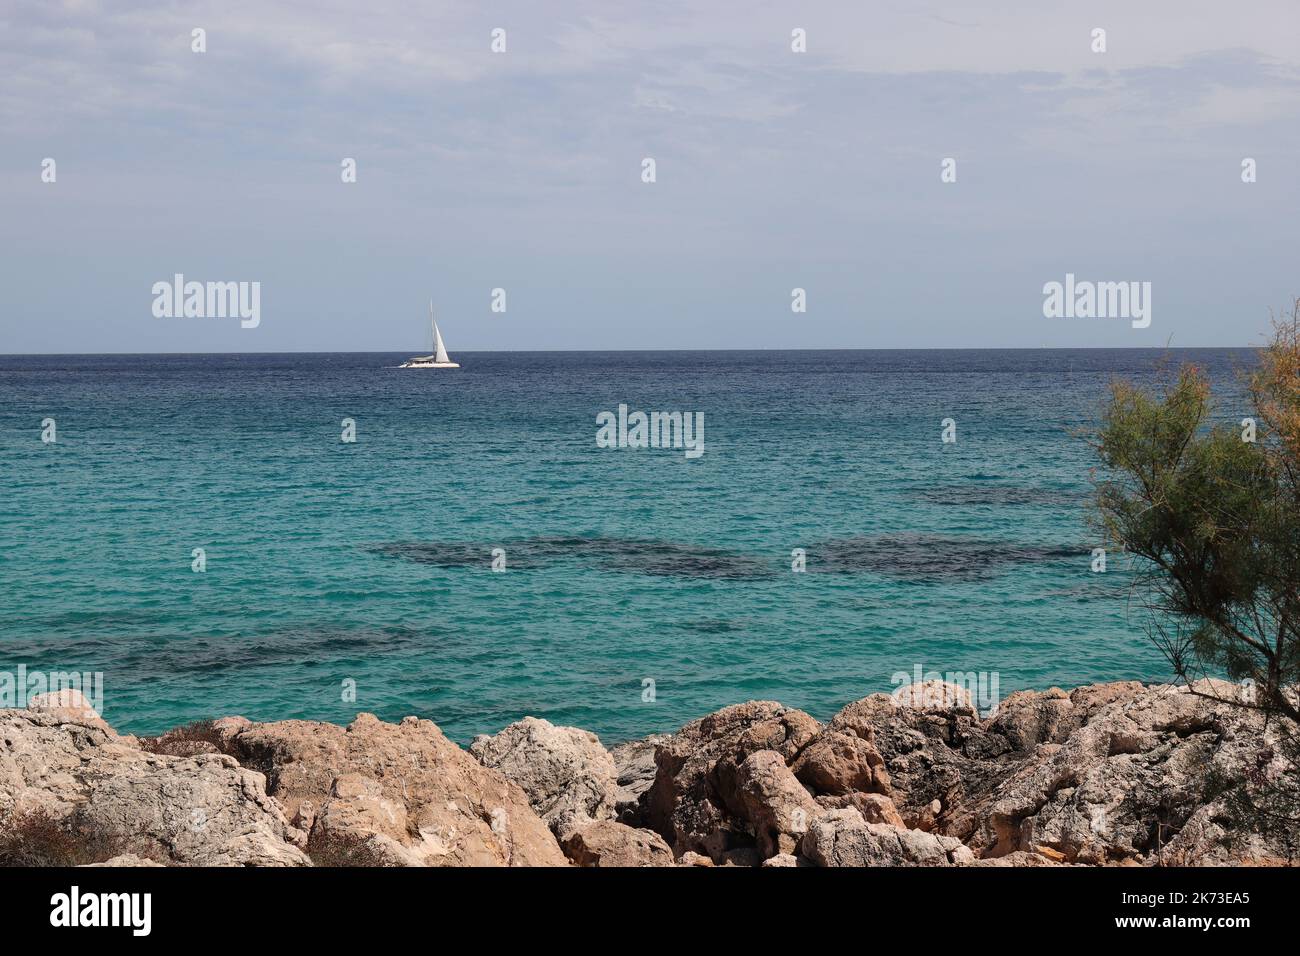 view from the beach promenade in Cala Ratjada to the turquoise sea, copy space Stock Photo